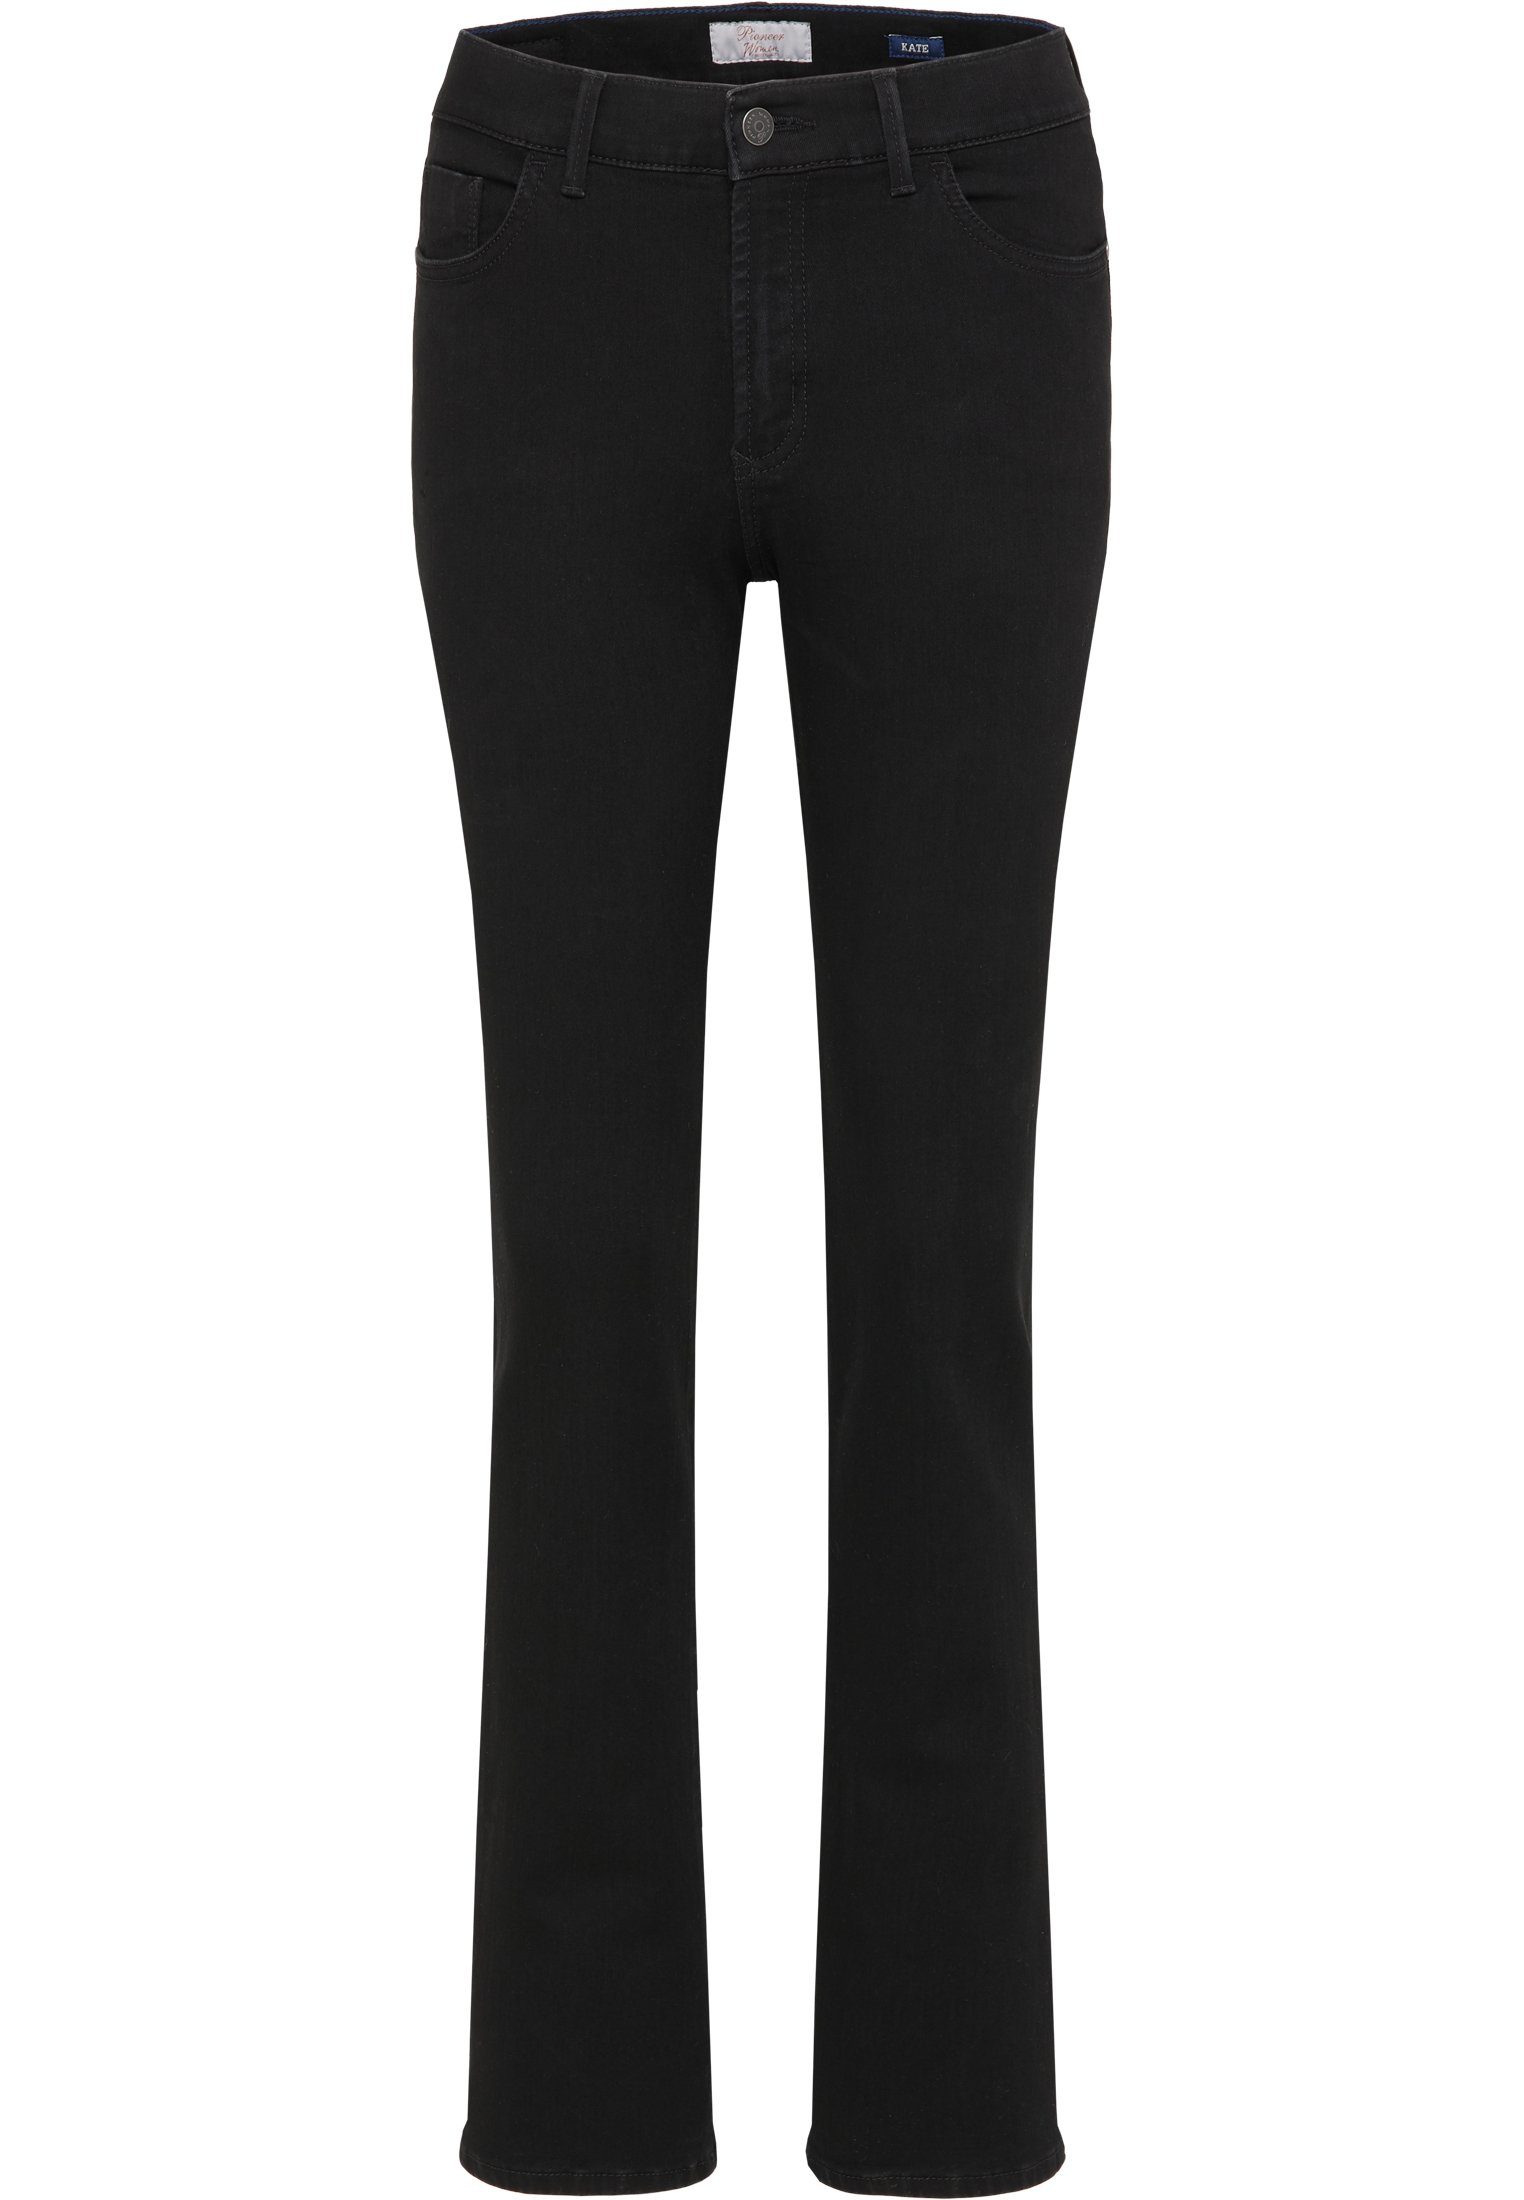 Pioneer Authentic Jeans Stretch-Jeans PIONEER KATE black 3213 4012.11 - POWERSTRETCH | Stretchjeans